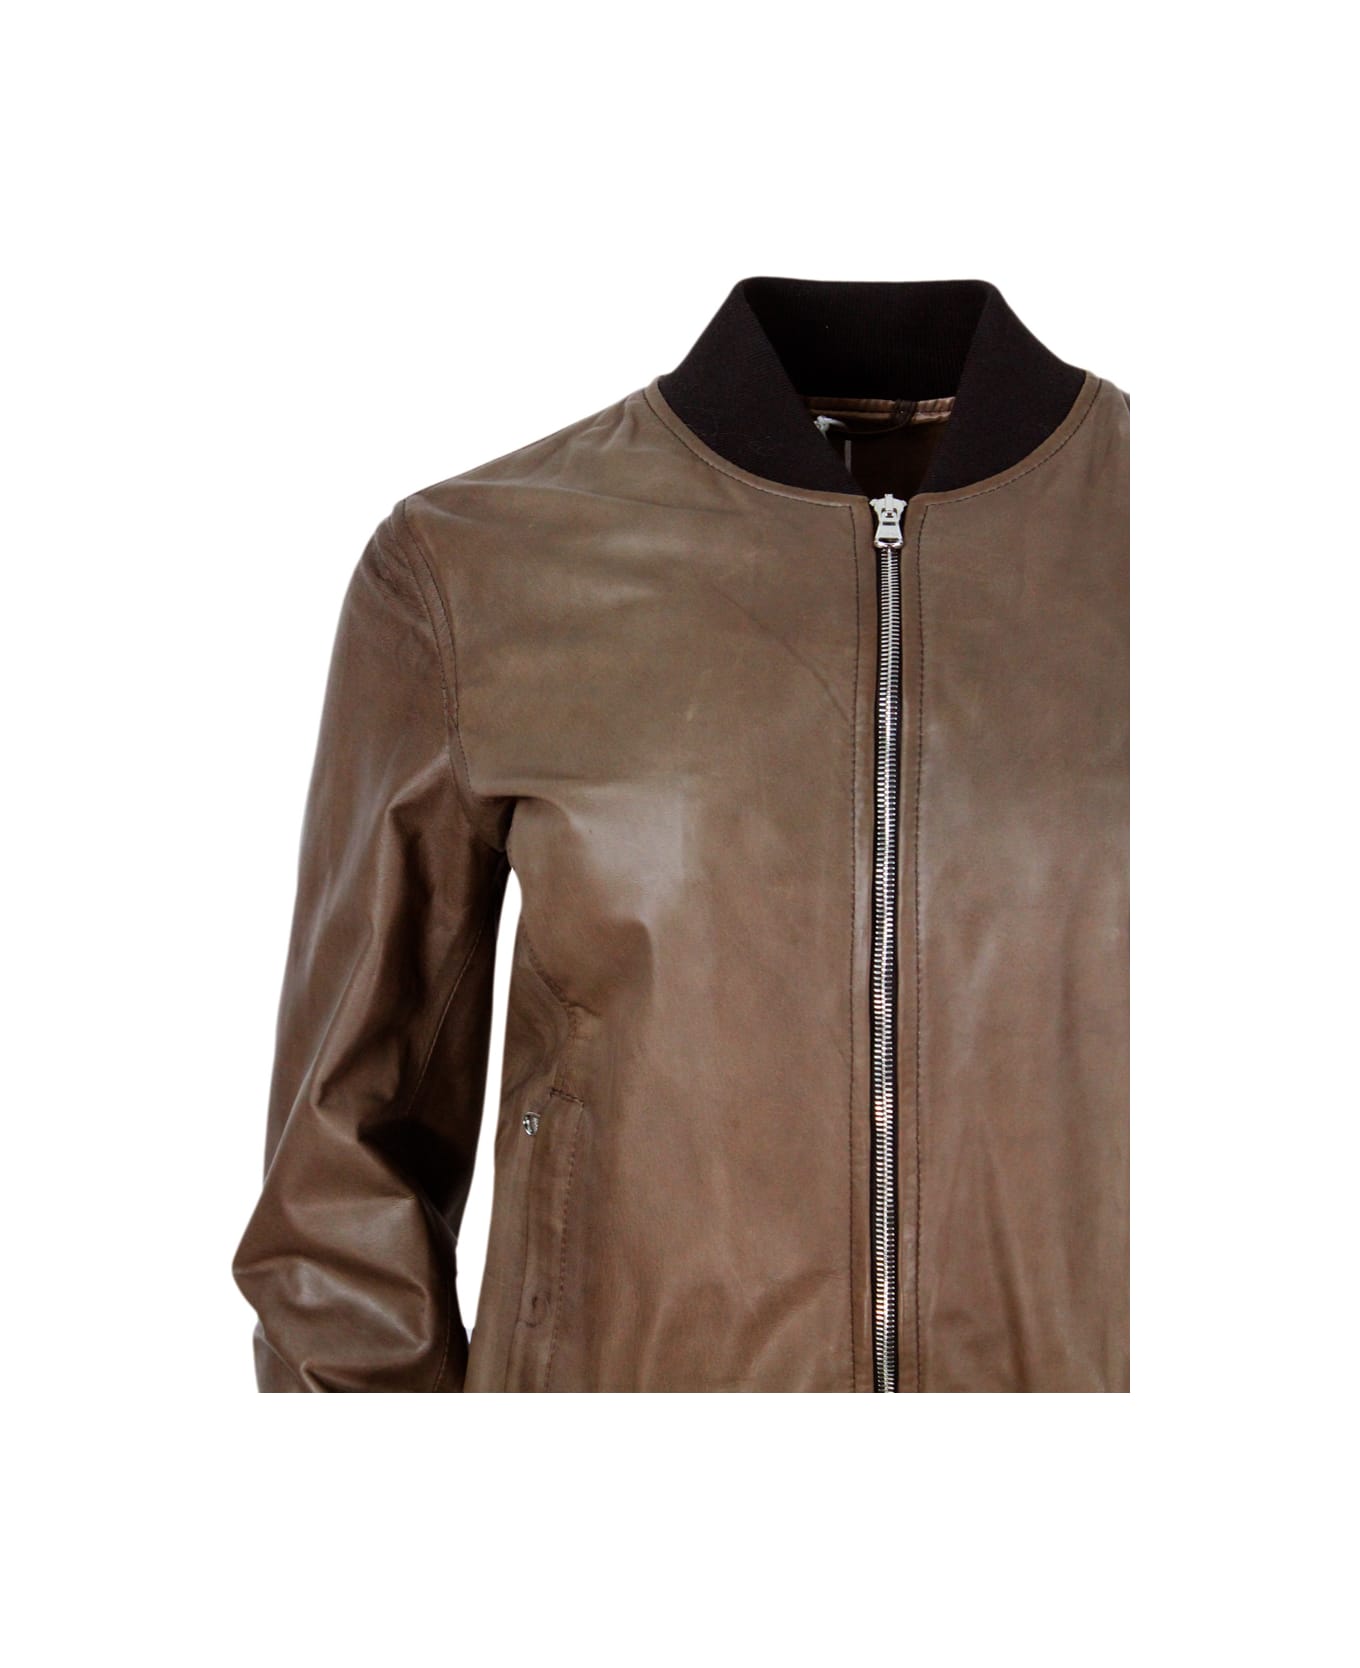 Barba Napoli Bomber Jacket In Soft And Fine Hand-buffered Leather With College Collar And Zip Closure - Brown ジャケット